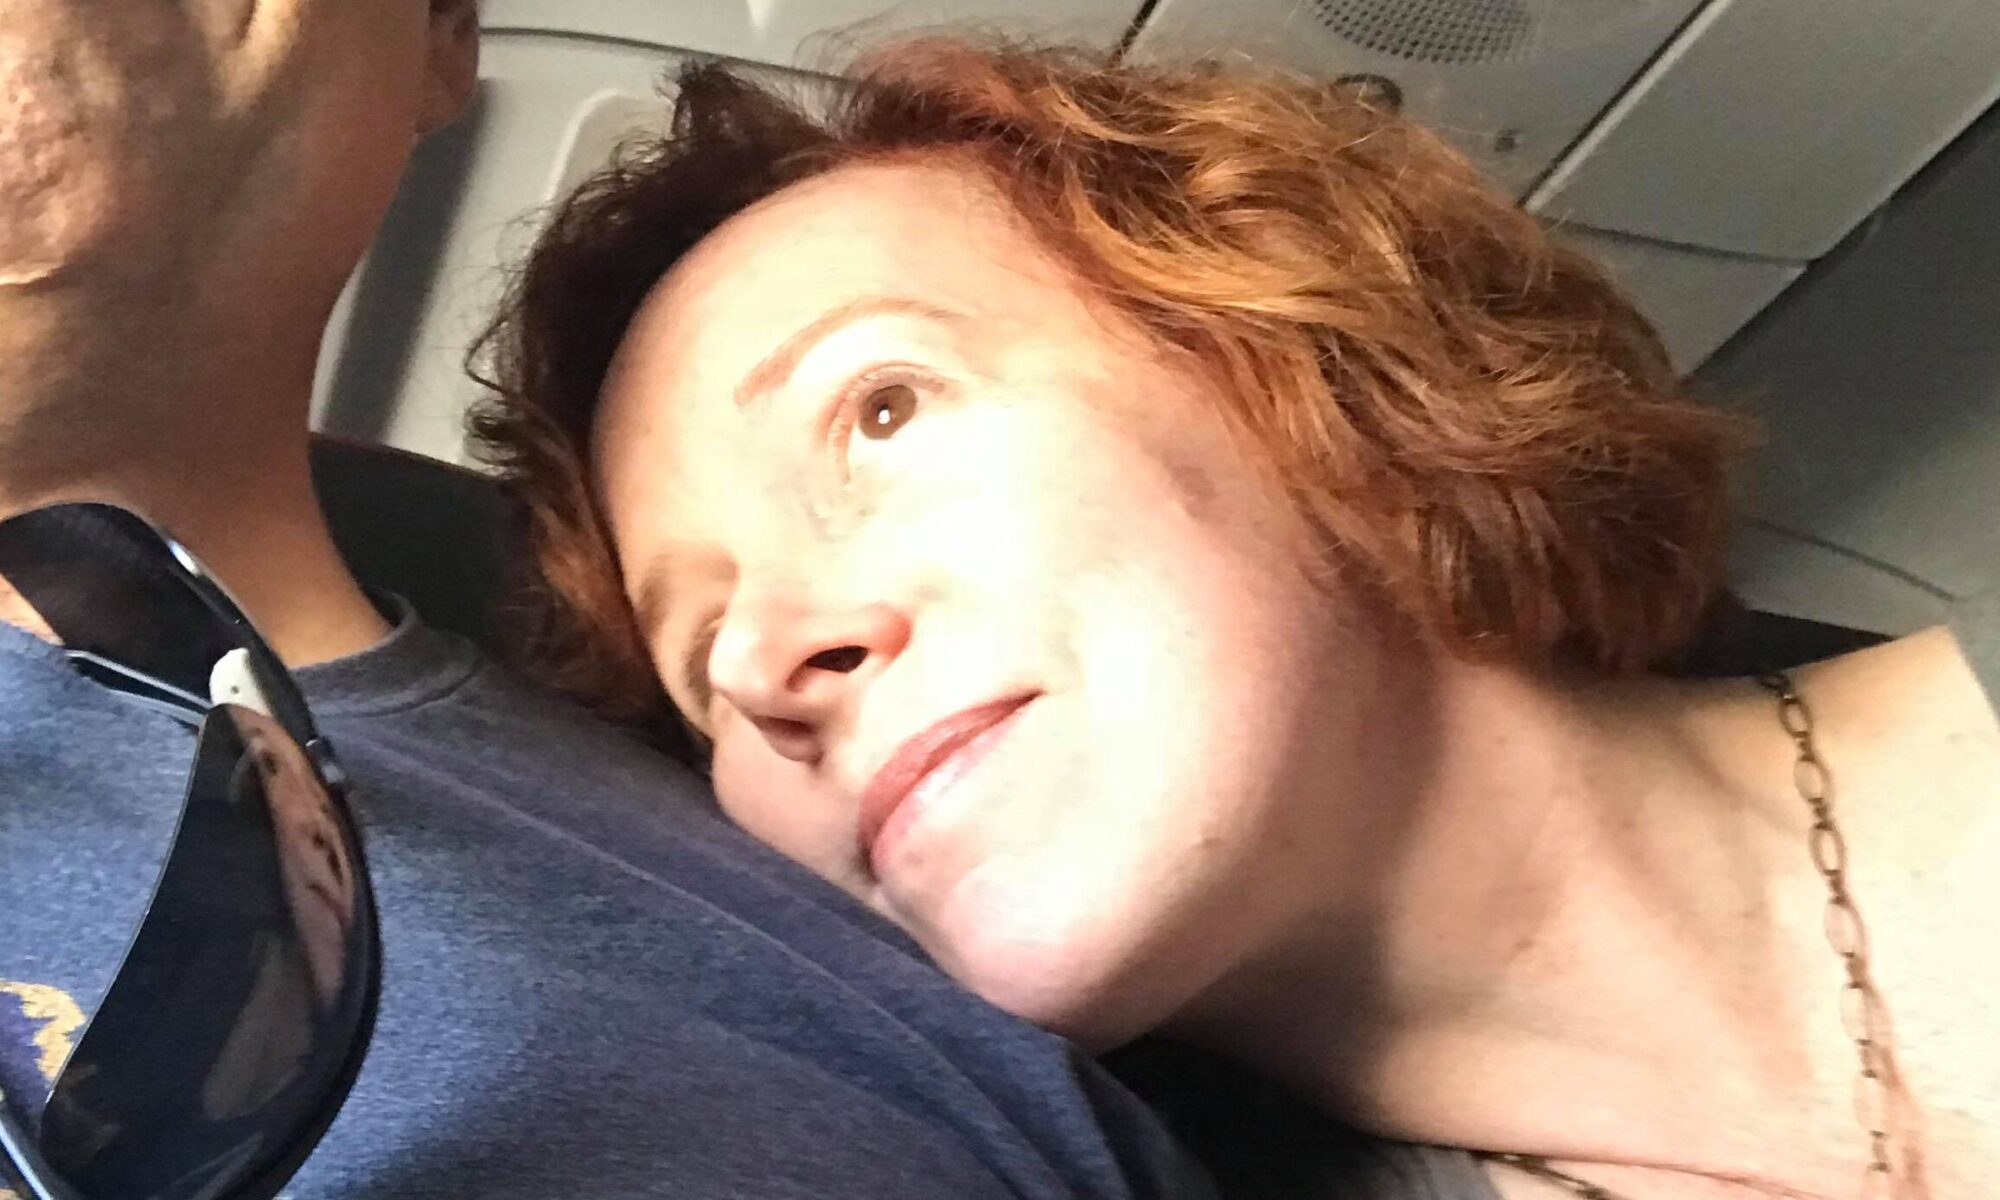 Edie White rests her right cheek against Jeremy White's chest as she peers out of an unseen airplane window.